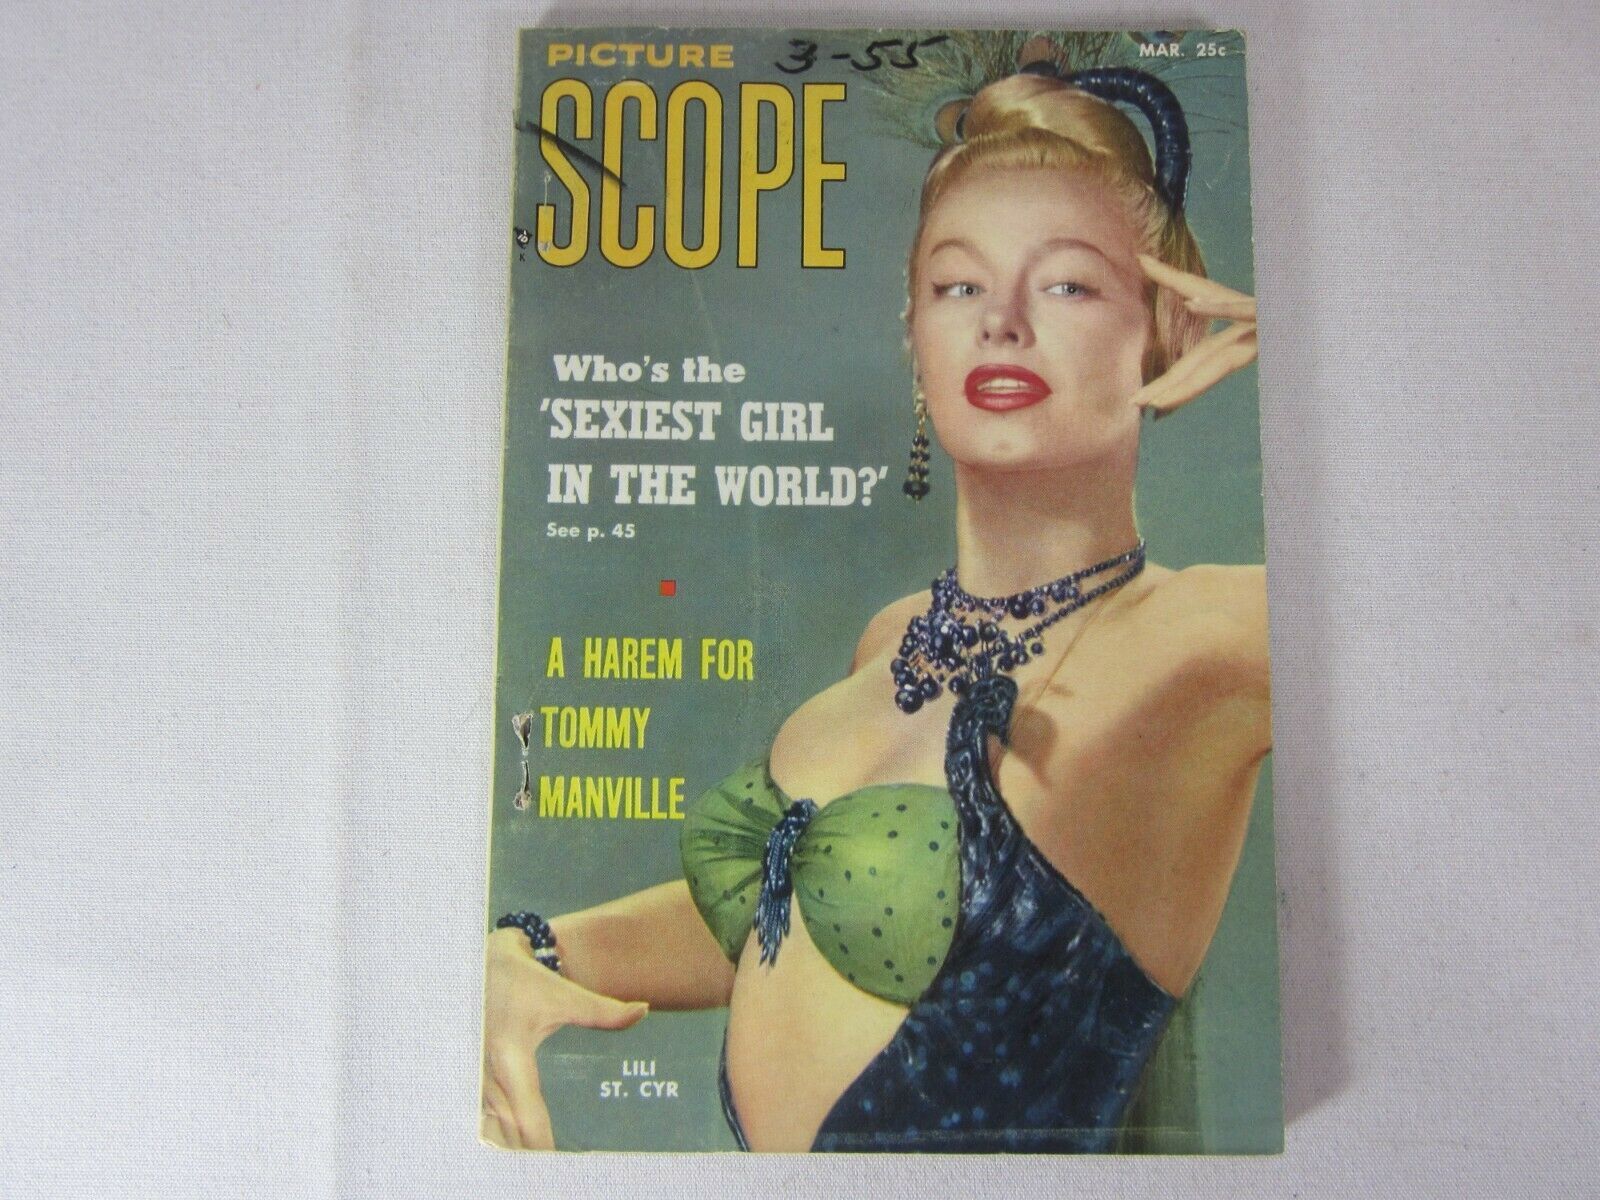 Primary image for Picture Scope Magazine March 1955 Lili St Cyr Joann Collins Pin-Up Vol 3 No 3